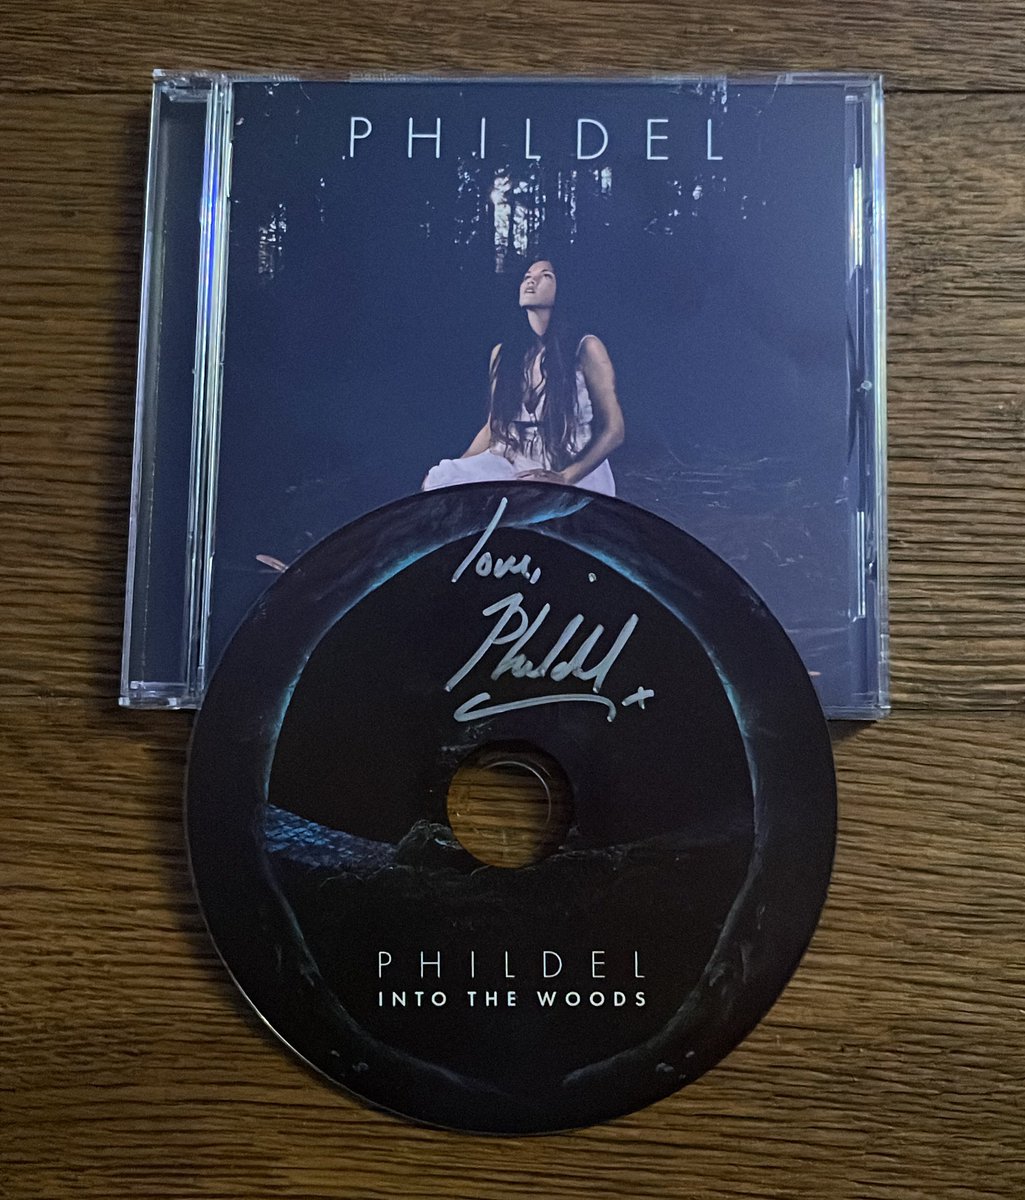 Great bit of post yesterday the latest album from the always wonderful @PHILDEL Into the Woods